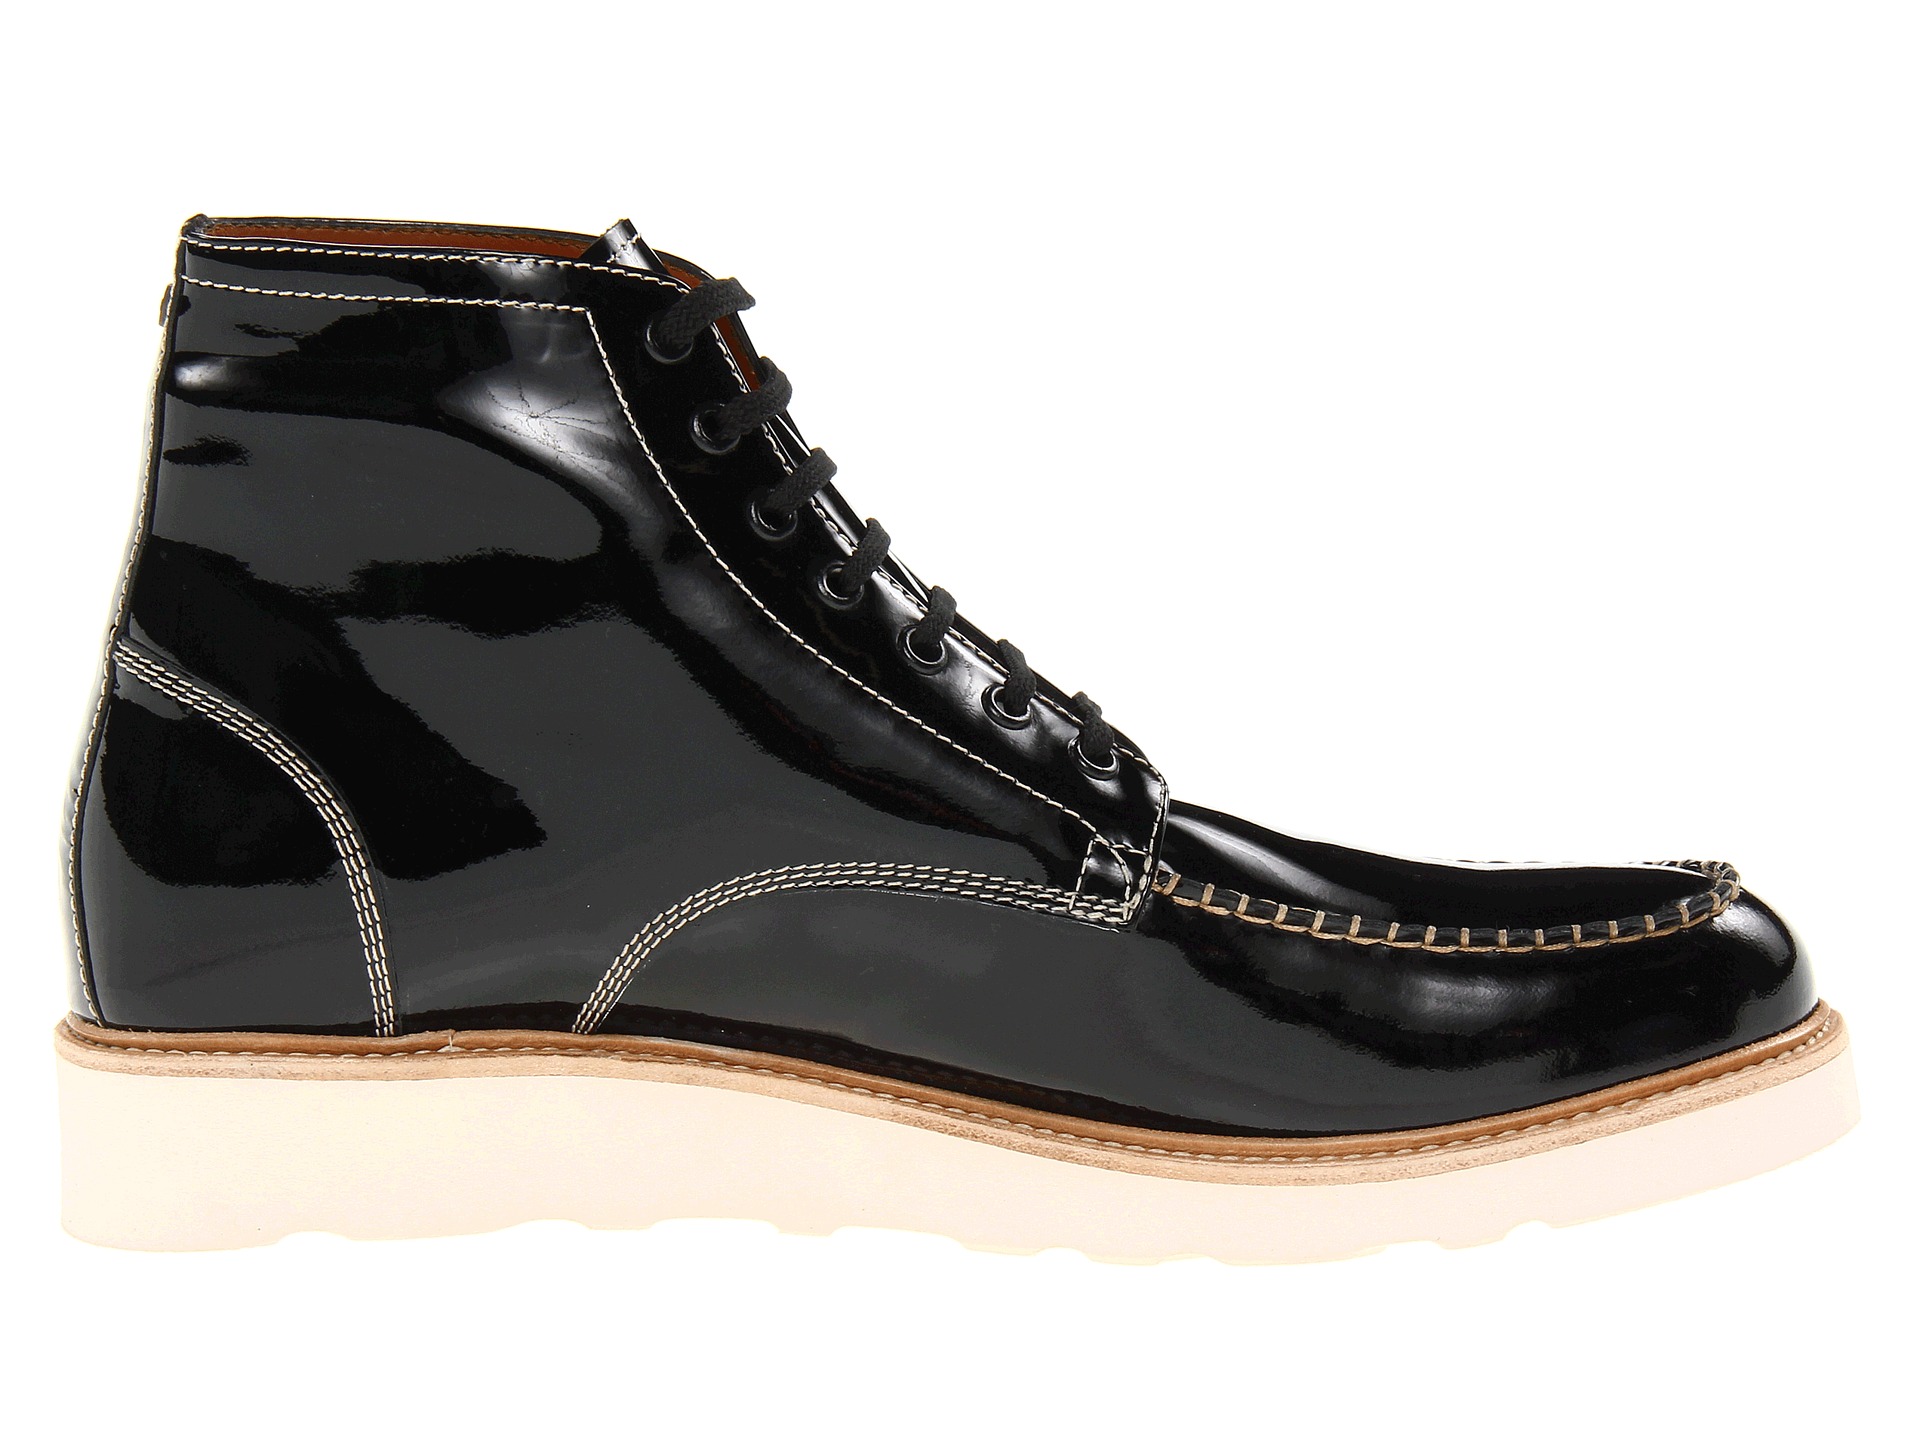 Dsquared2 Japanese Winter Ankle Boot | Shipped Free at Zappos